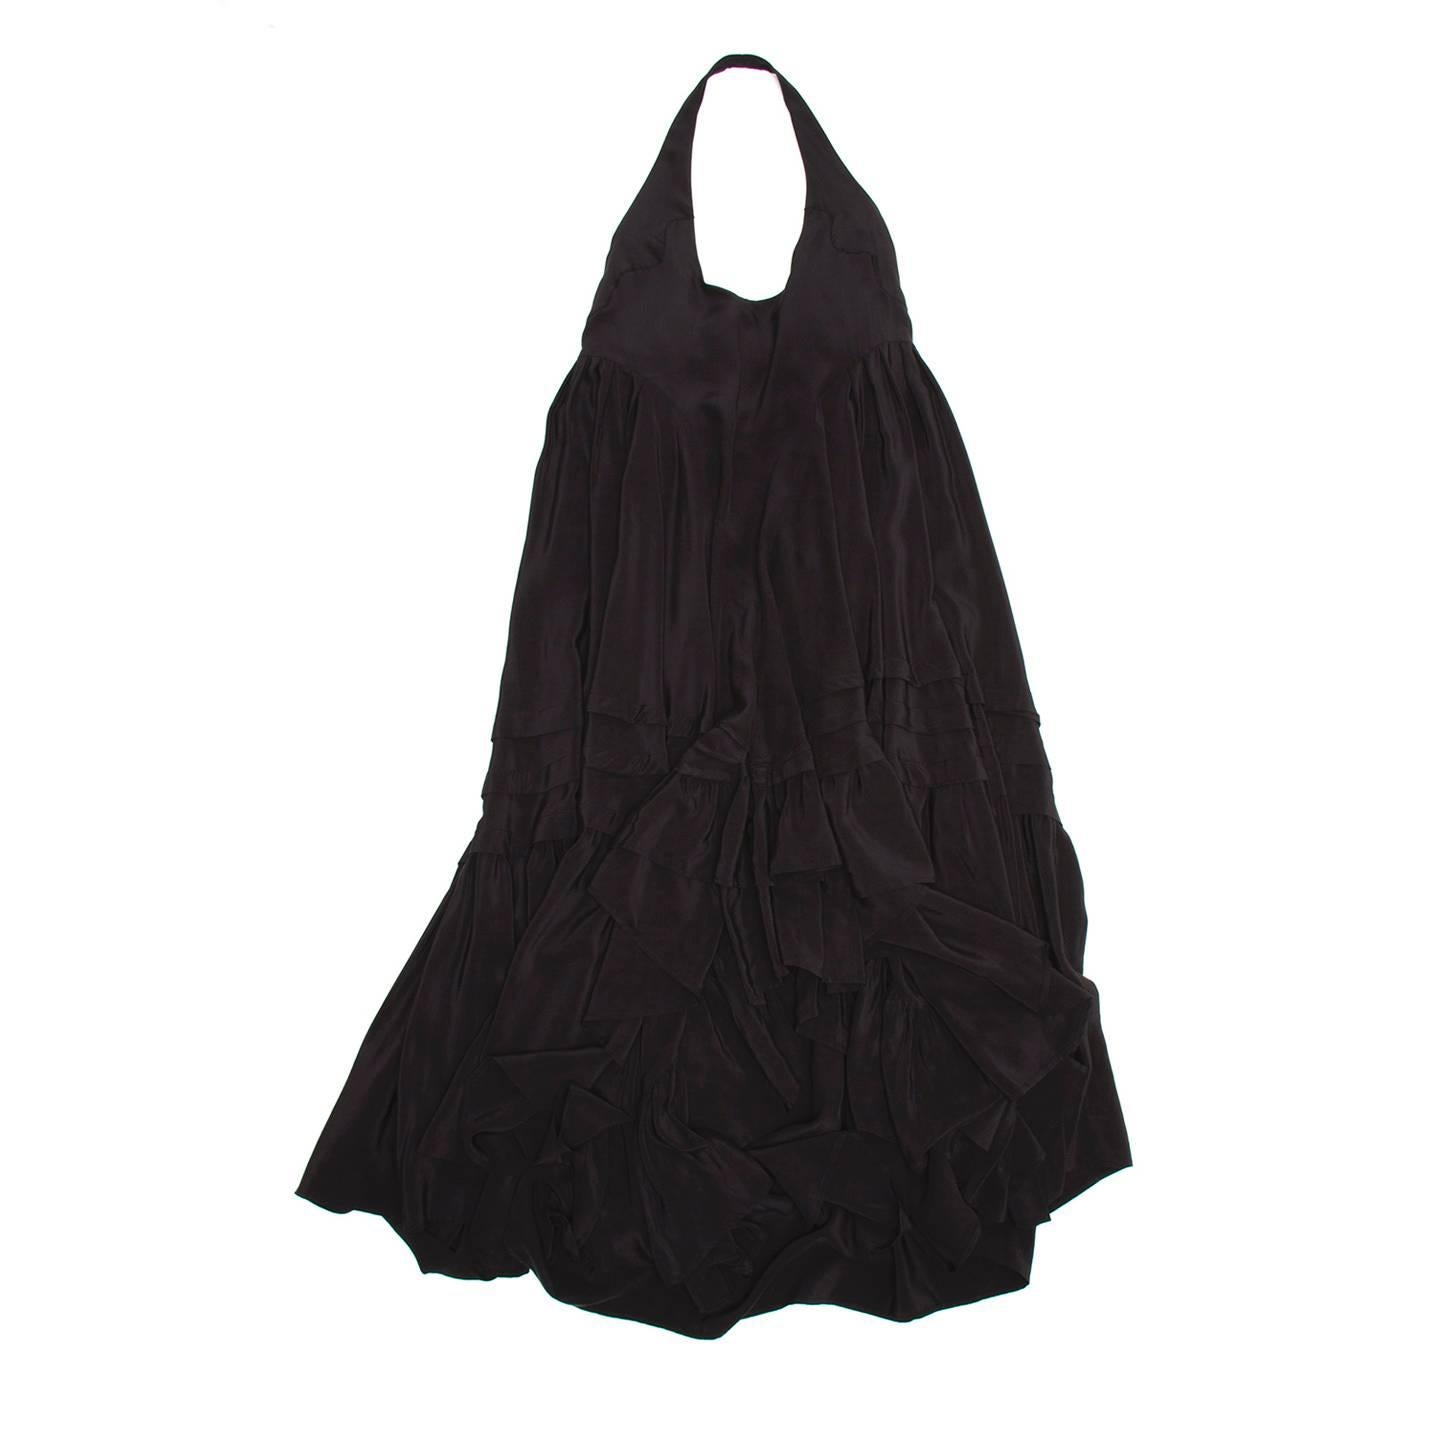 Black silk dress with halter neck and open back. The fit is very full, wide and flaring with a gathered bottom layer; the hem is longer at back to the ankle and at front it is below the knee.

Size  42 French sizing

Condition  Excellent: worn a